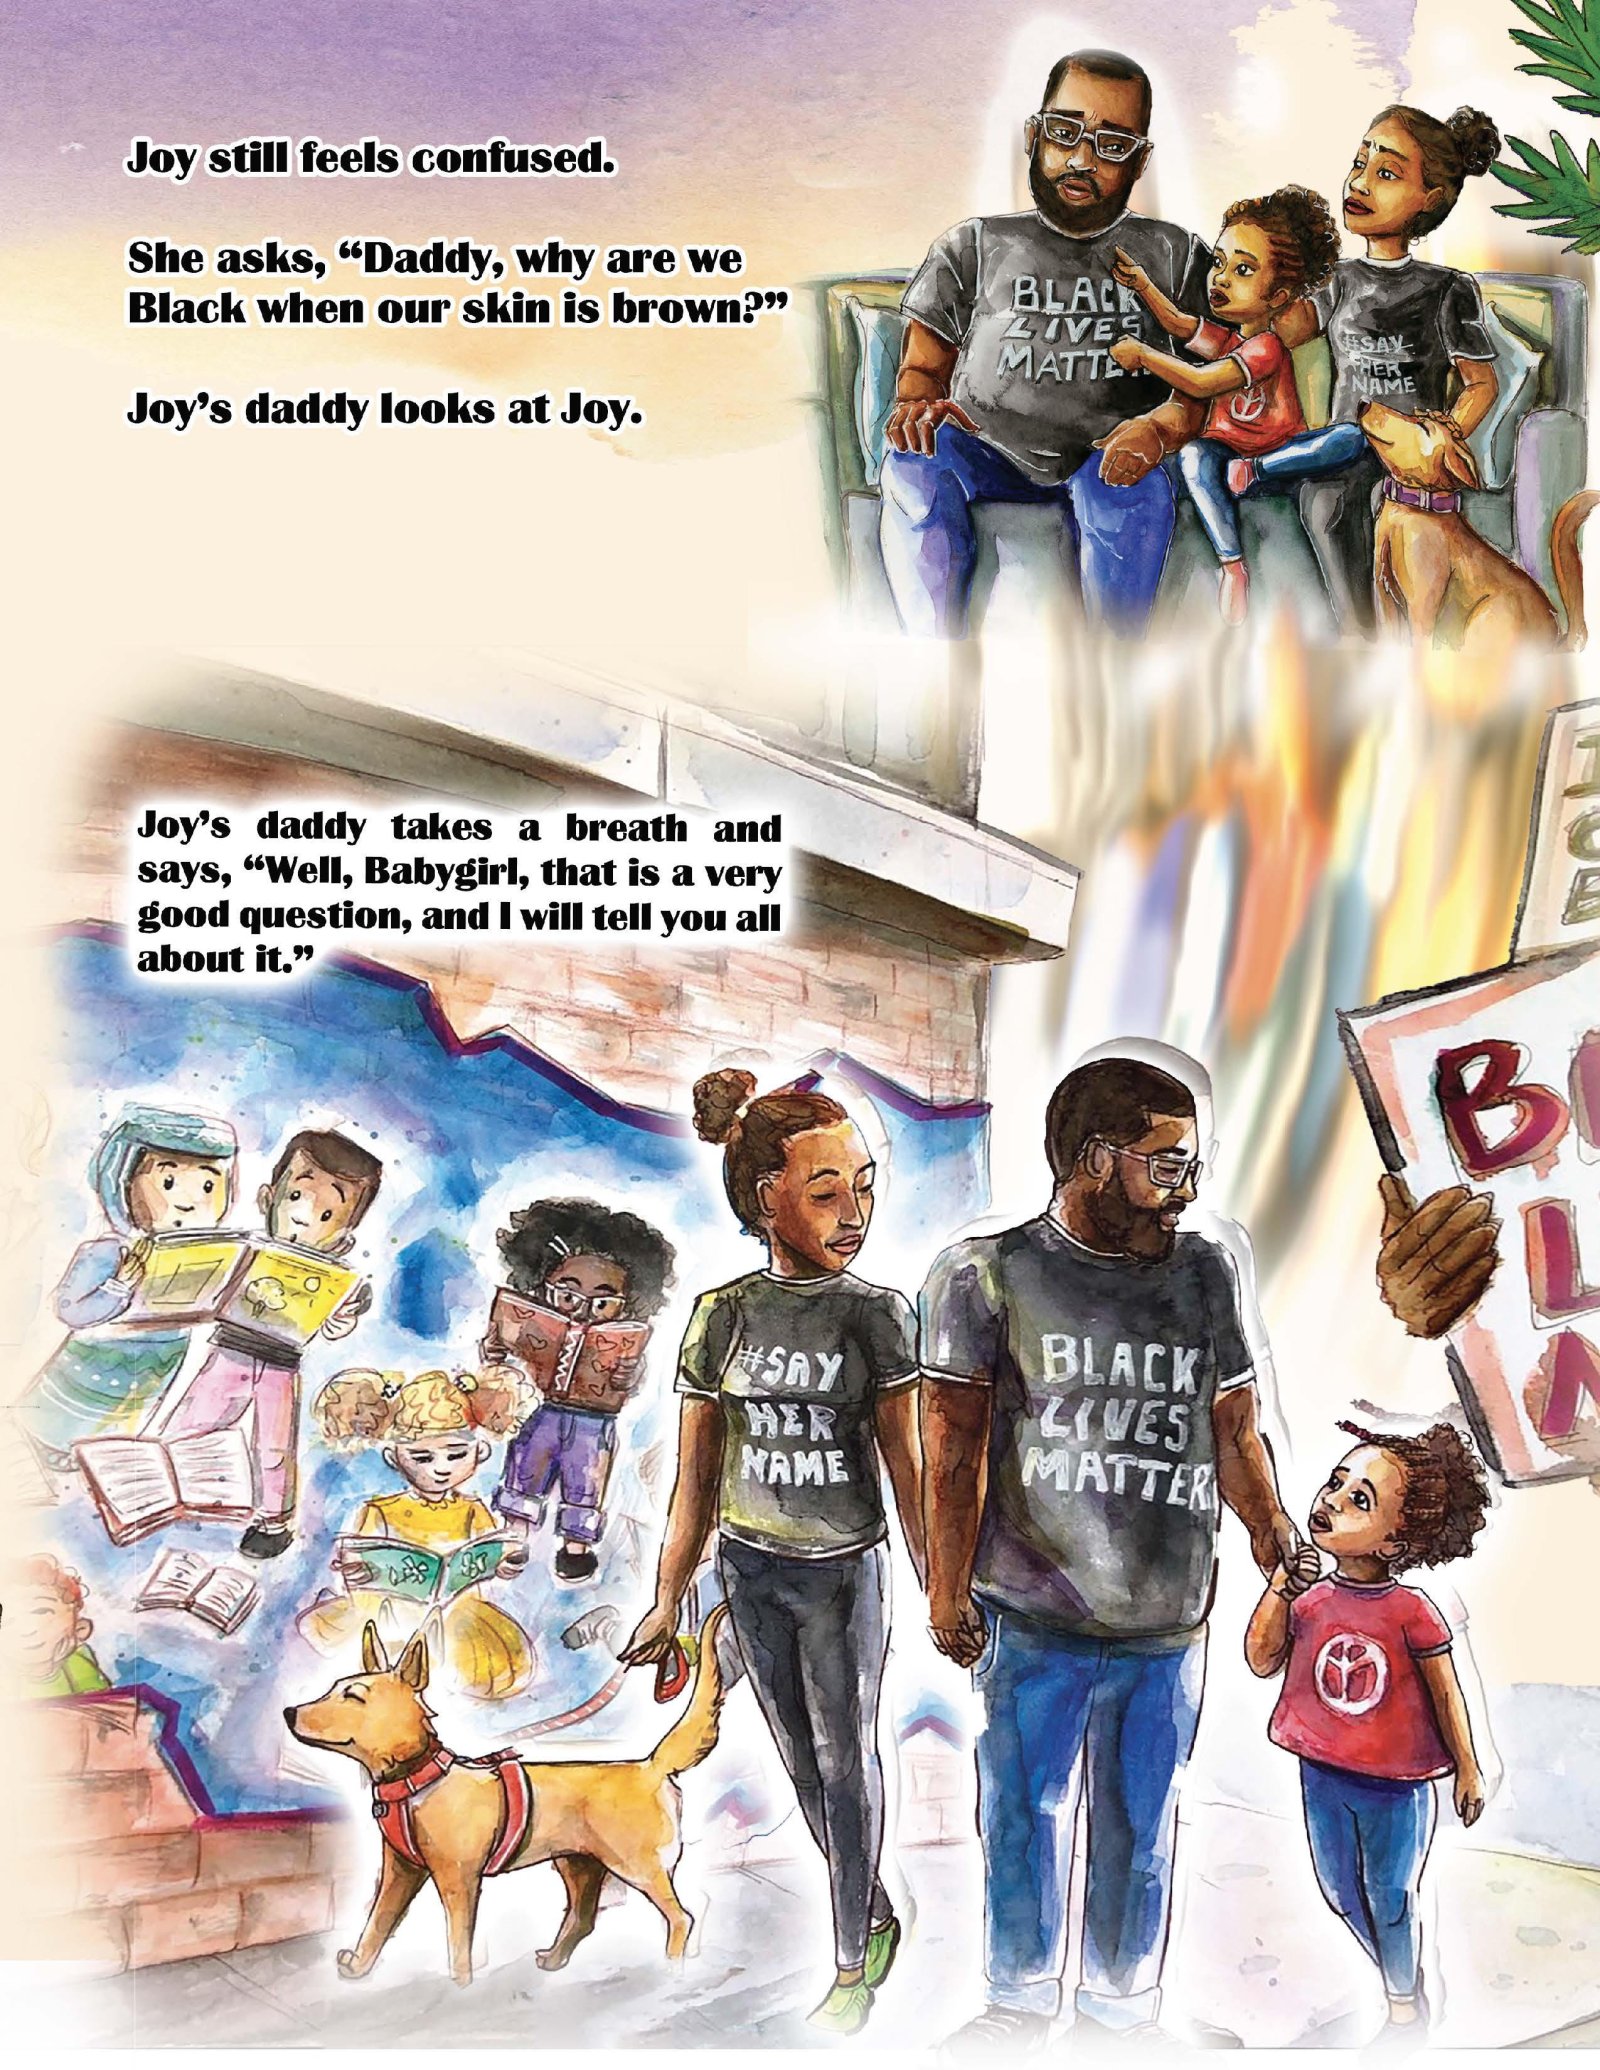 A page from Bedford Palmer II's book, Black Joy, is shown with a family sitting together and another image of a the same family walking together with their dog.